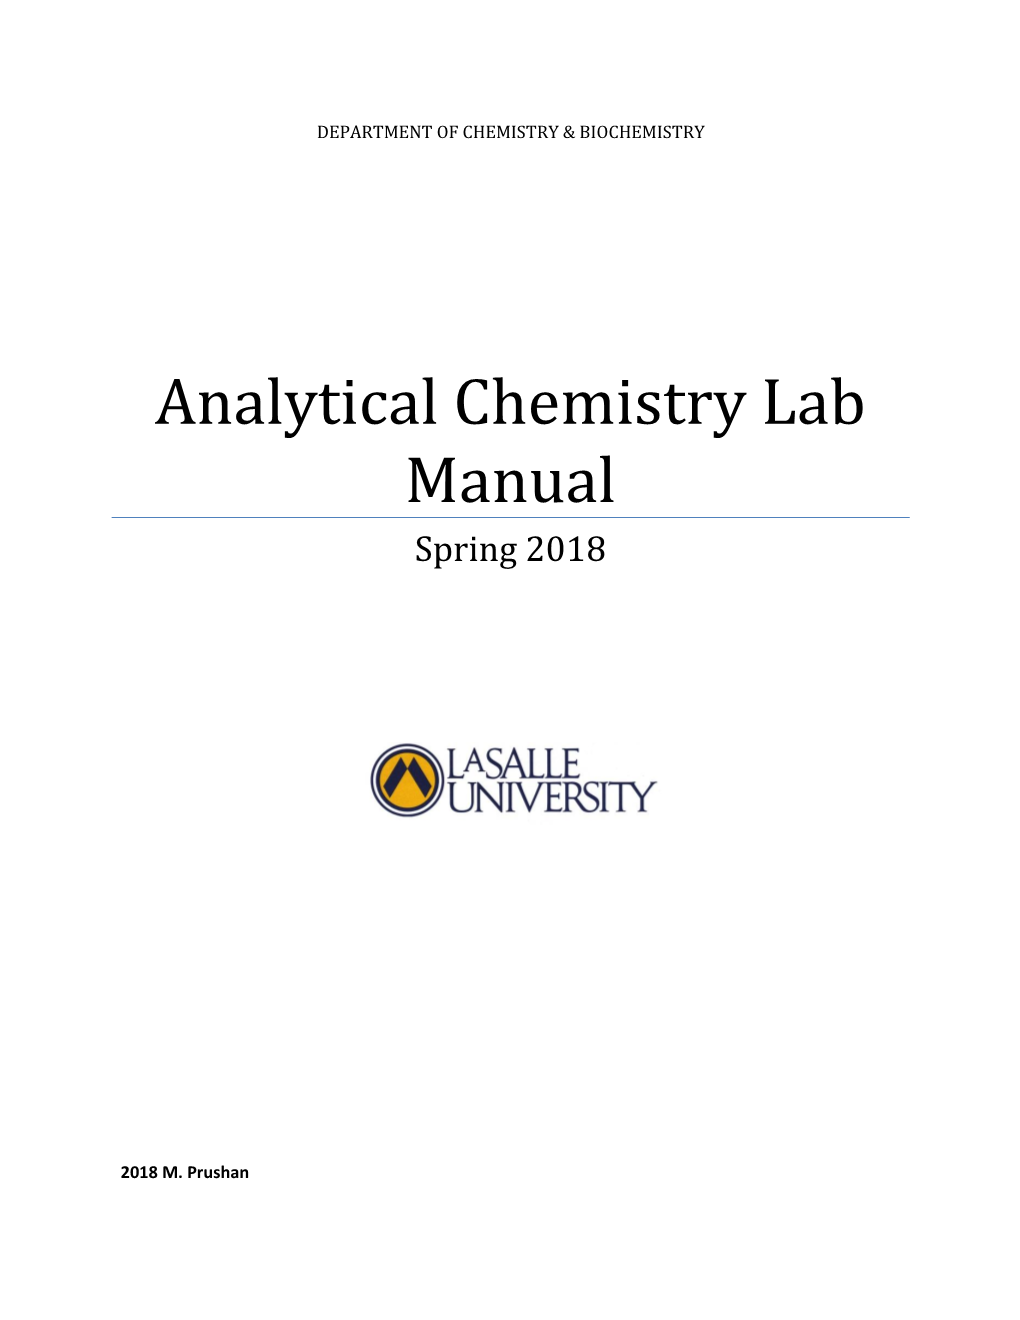 Analytical Chemistry Lab Manual Spring 2018